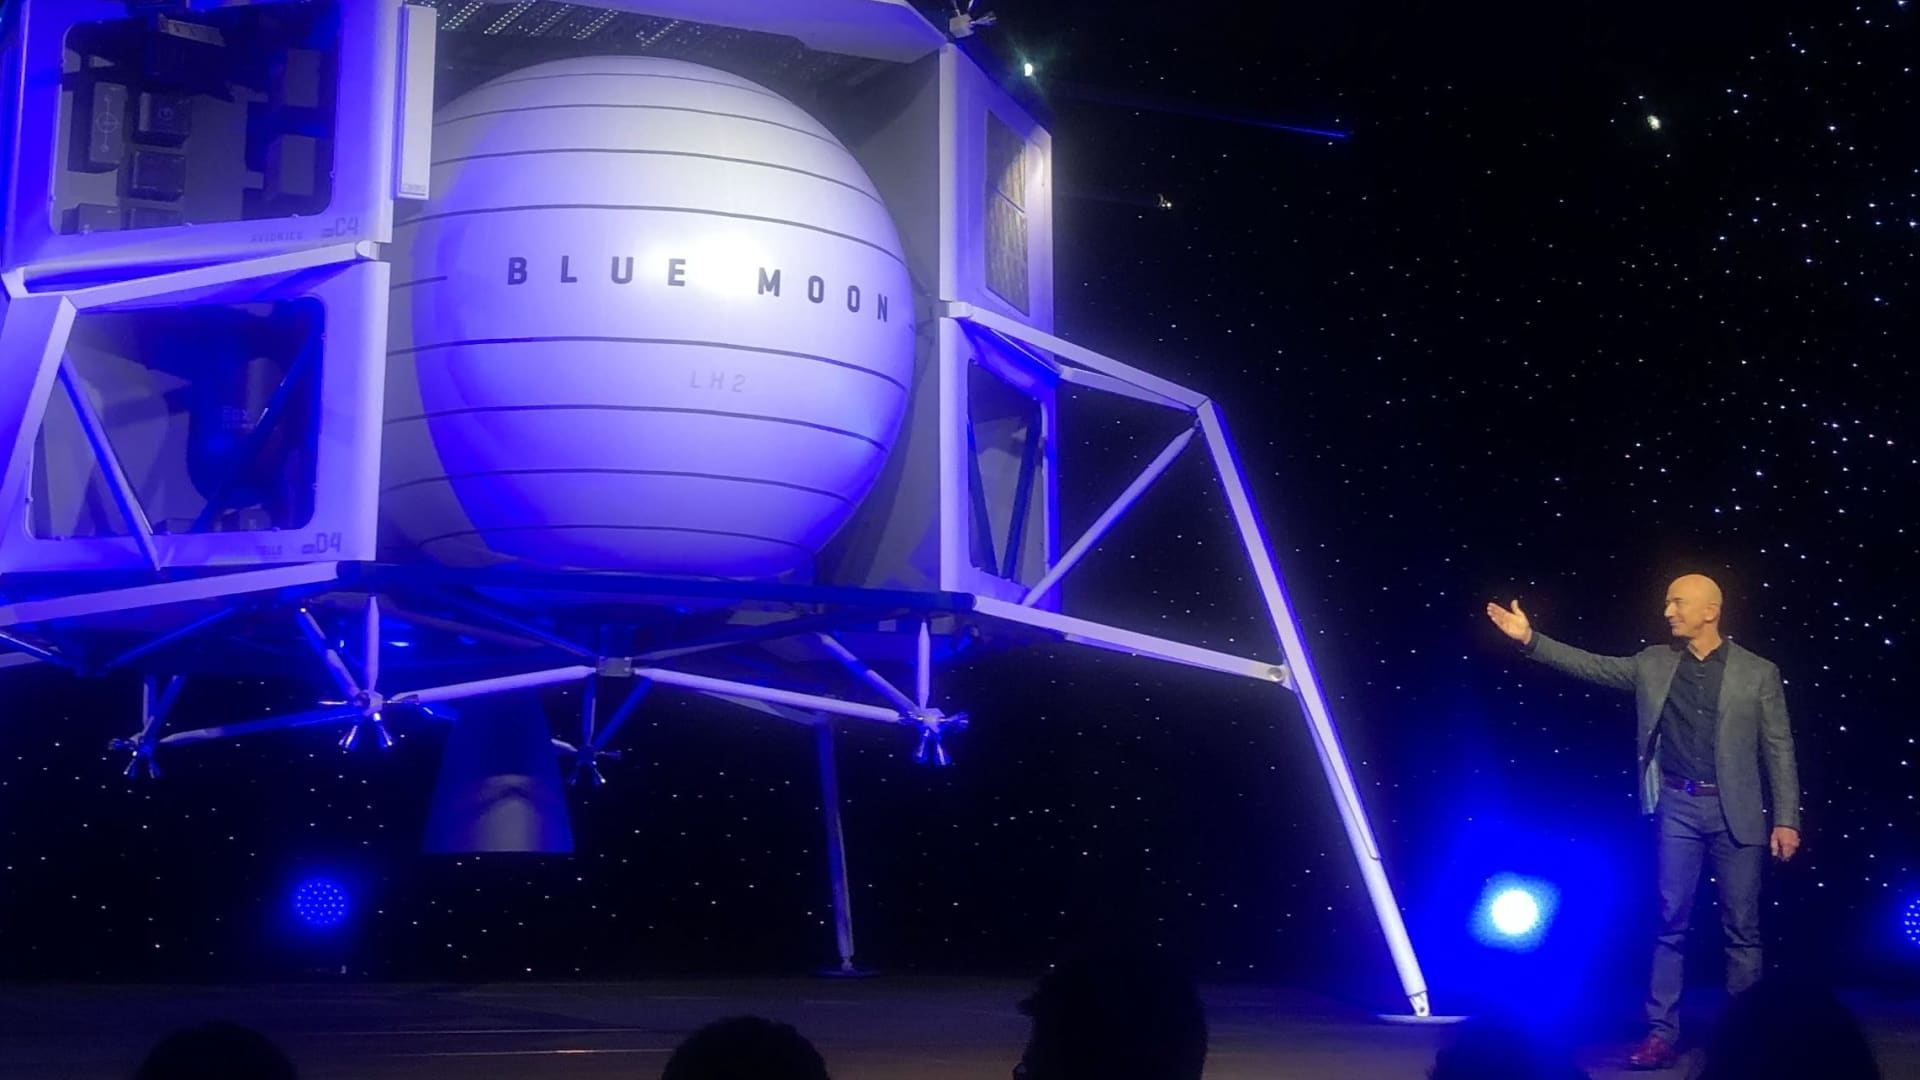 Jeff Bezos unveils lunar lander to take astronauts to the moon by 2024